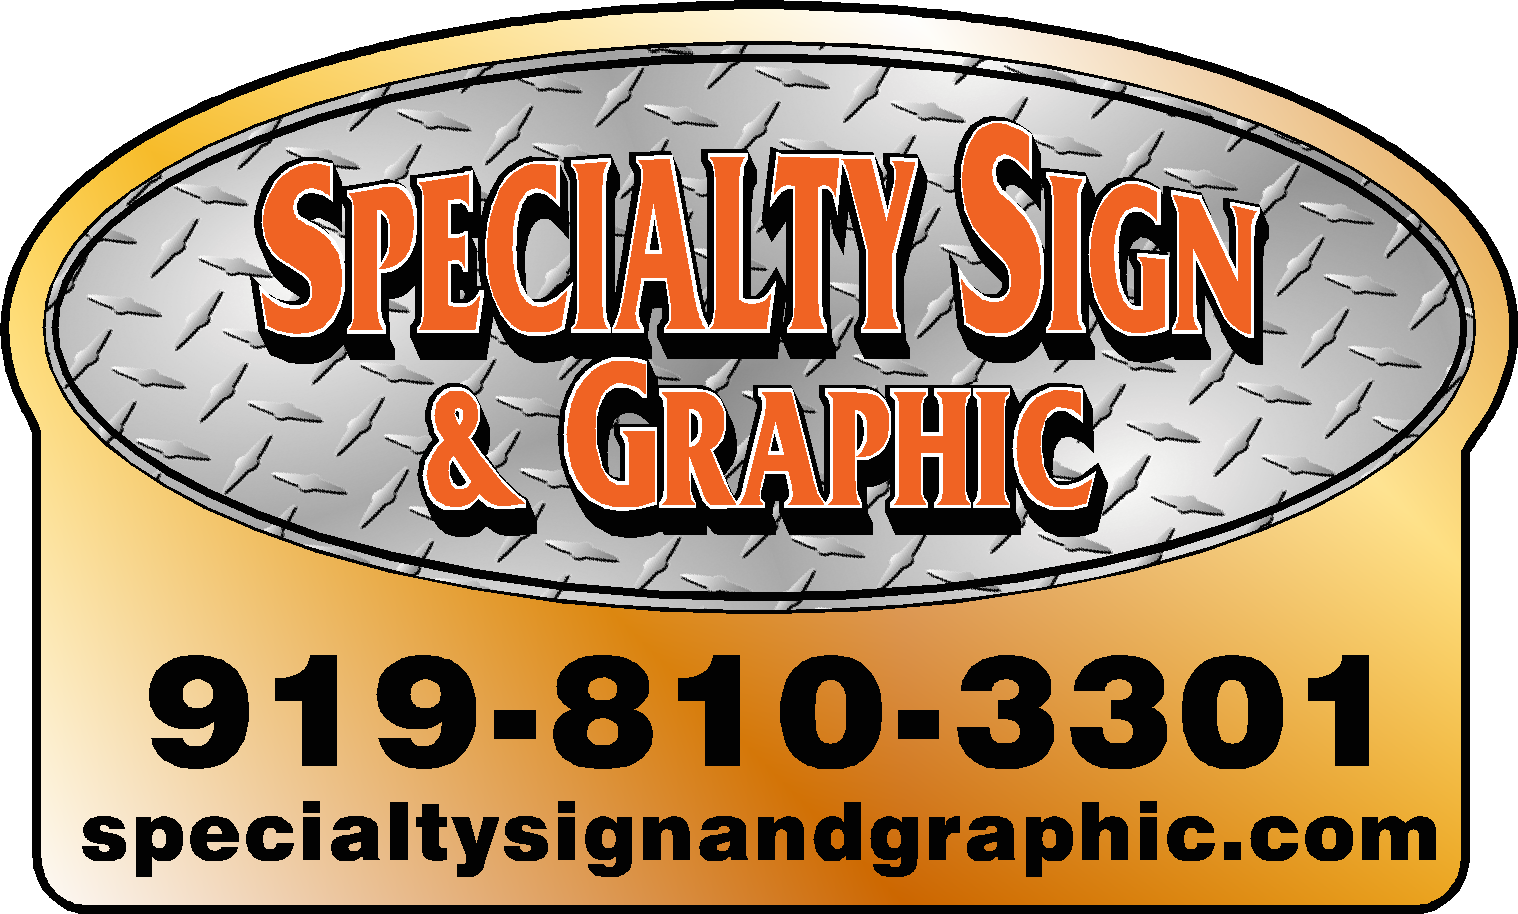 Specialty Sign & Graphic